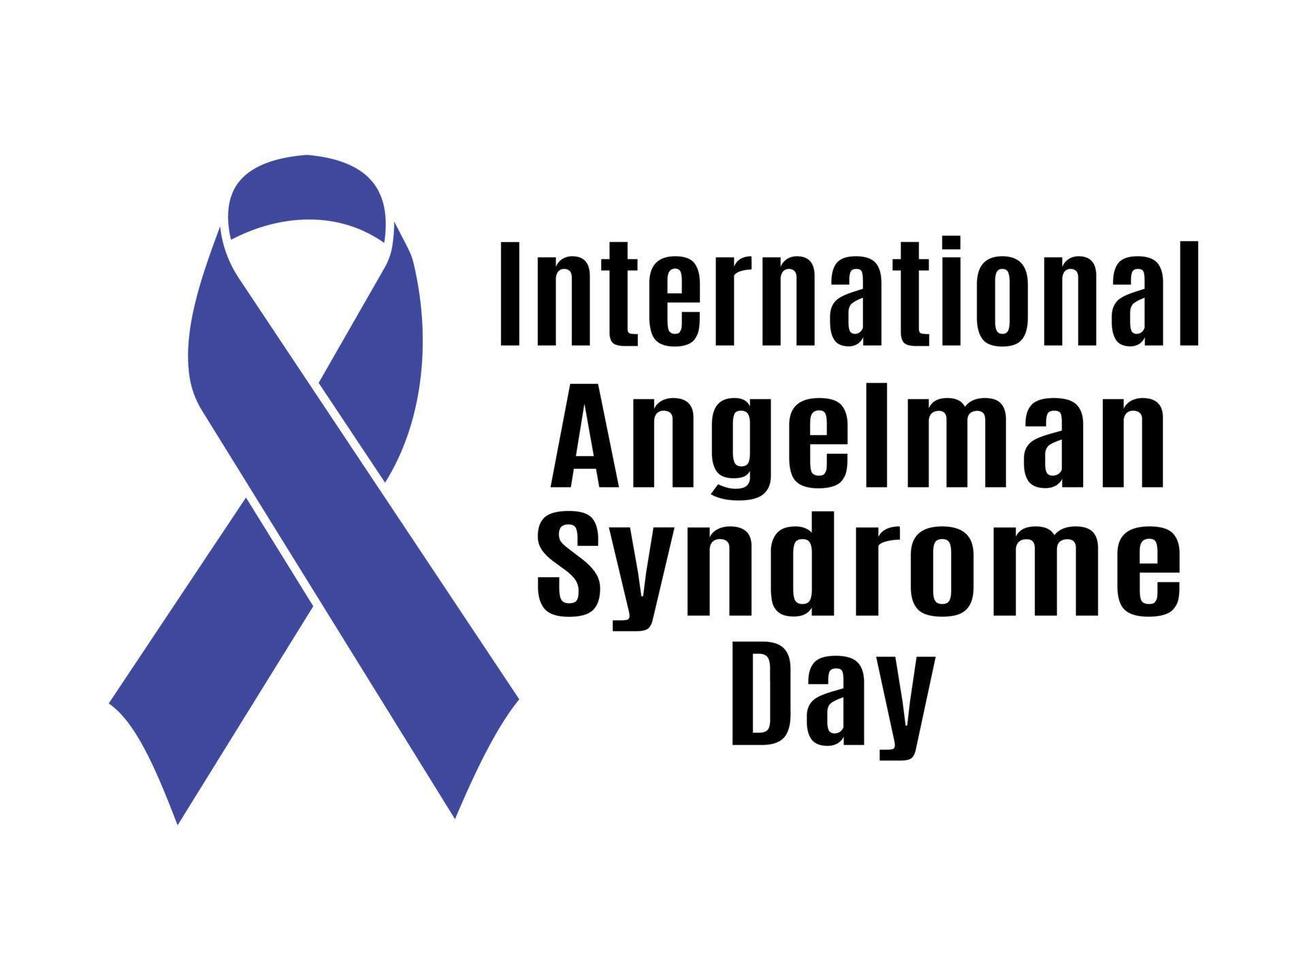 International Angelman Syndrome Day, Idea for a poster, banner, flyer or postcard on a medical theme vector